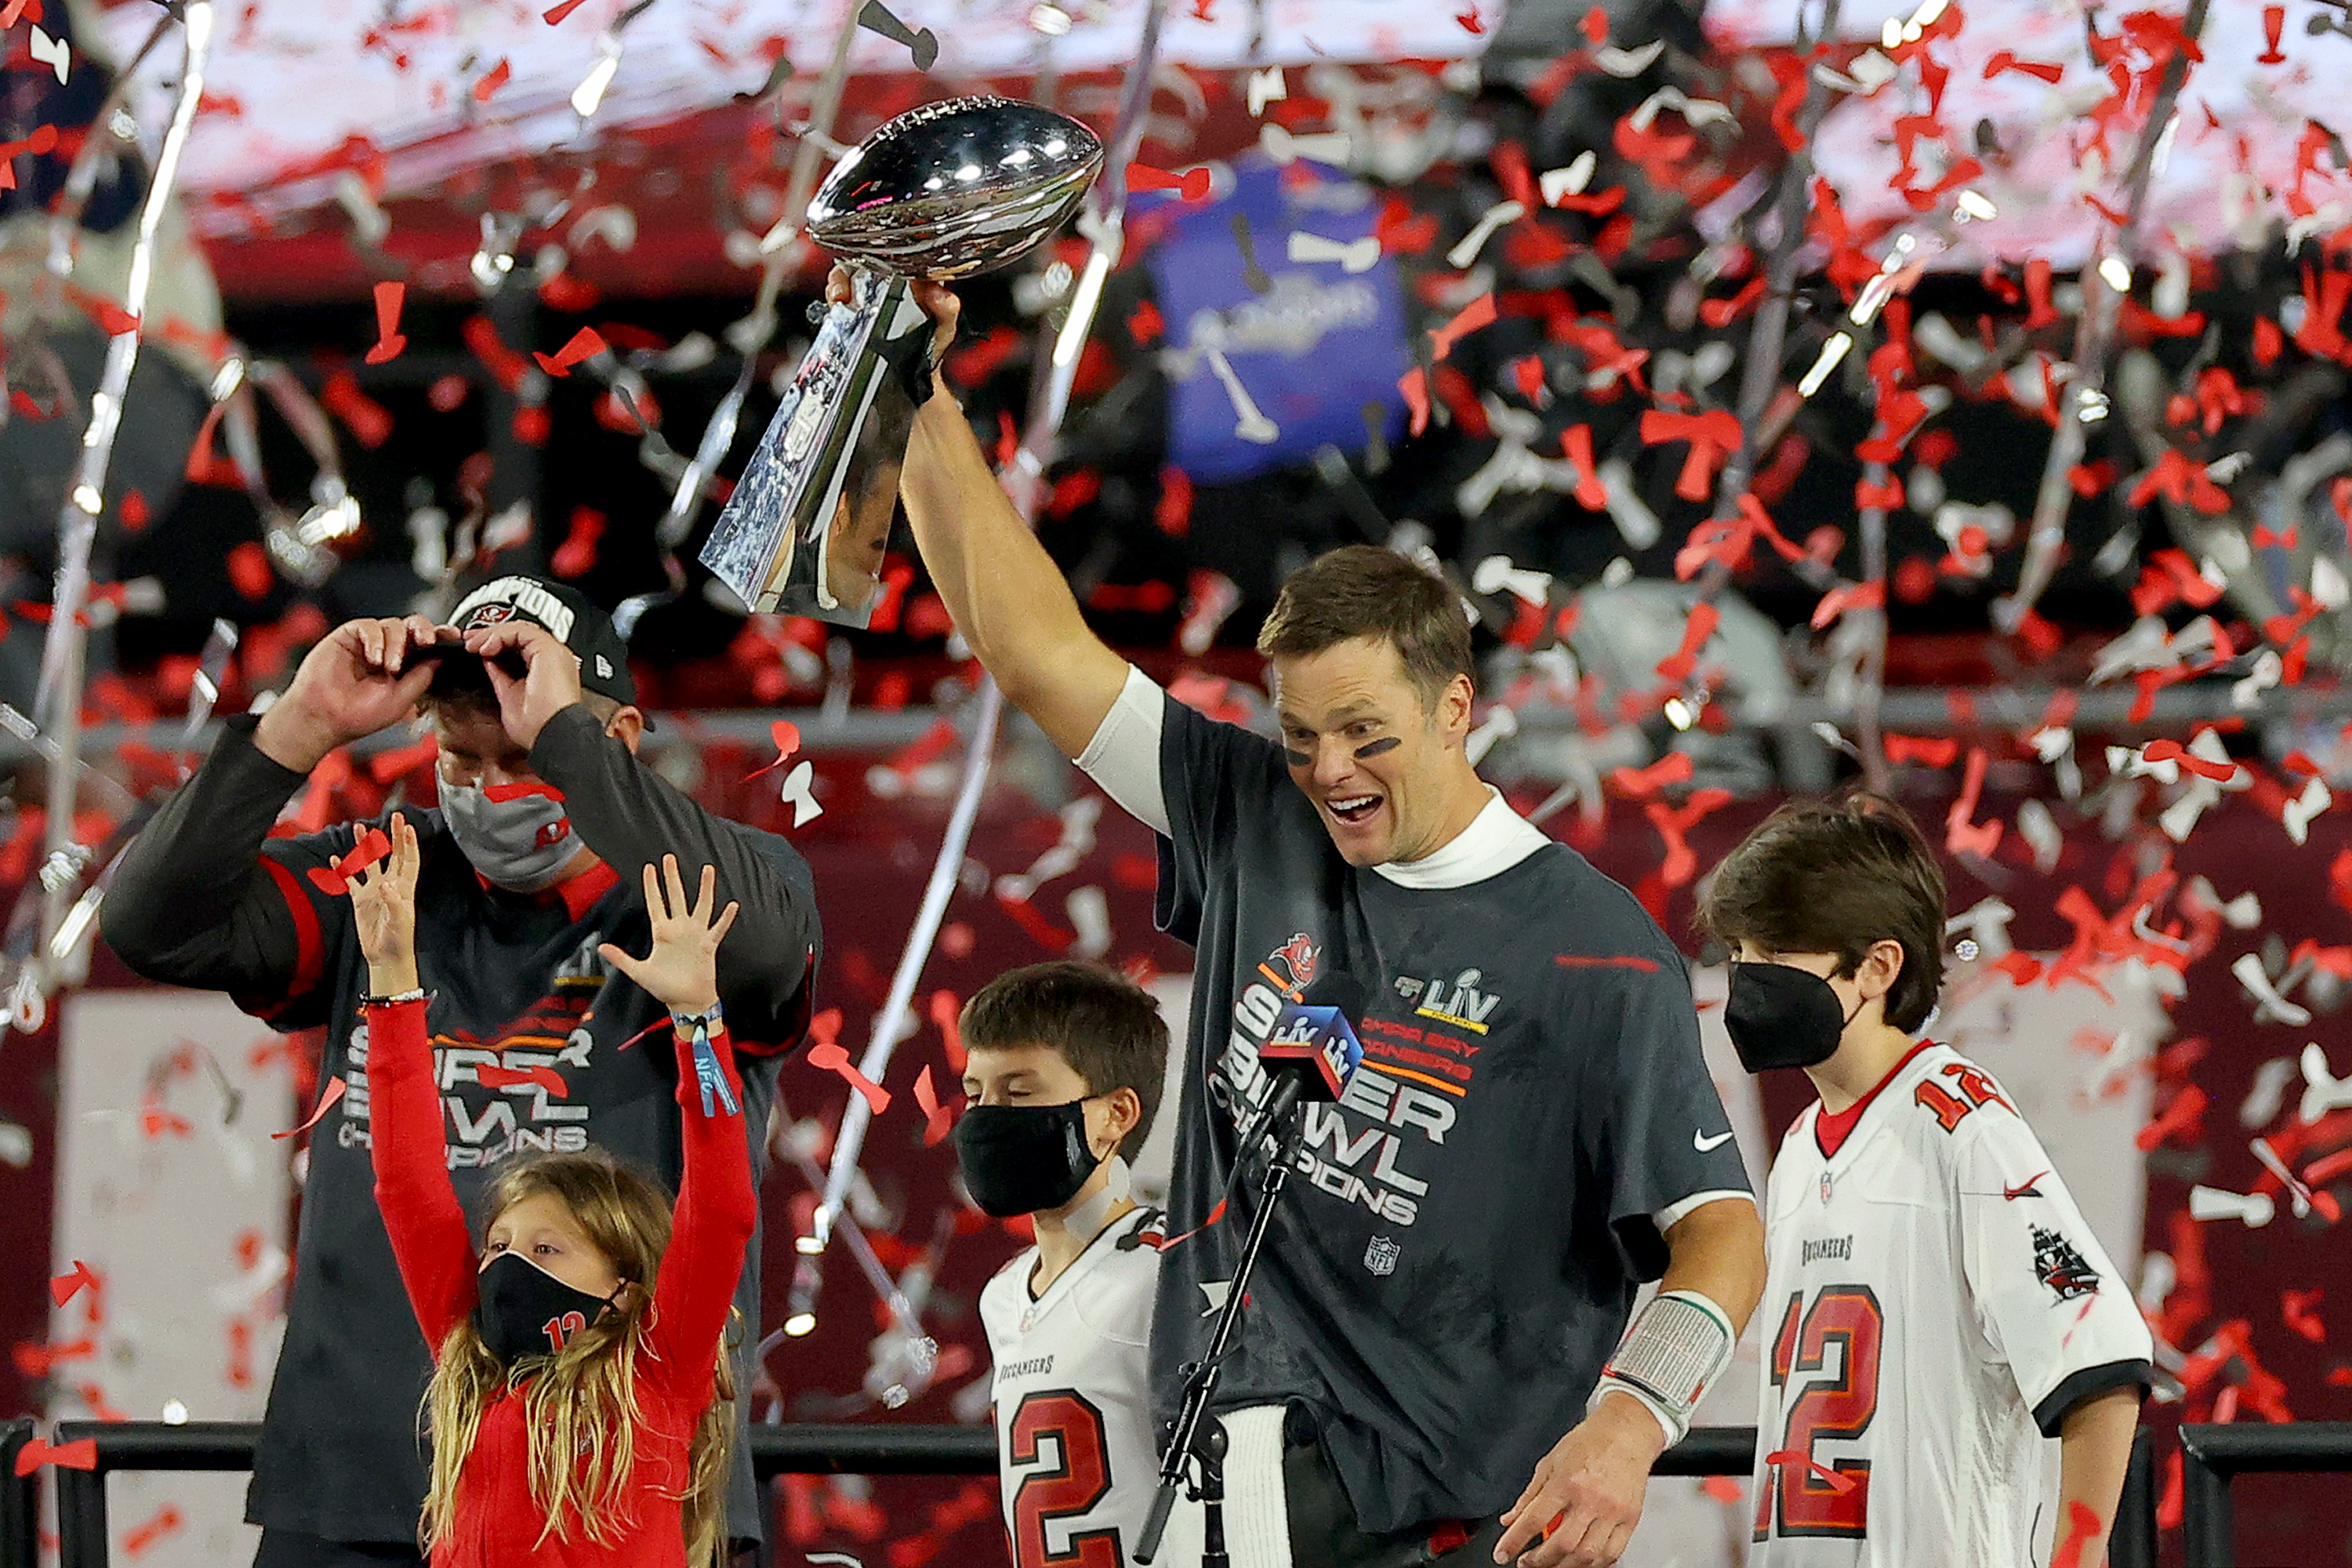 Tampa Bay Buccaneers Super Bowl History Wins, Losses, Appearances and